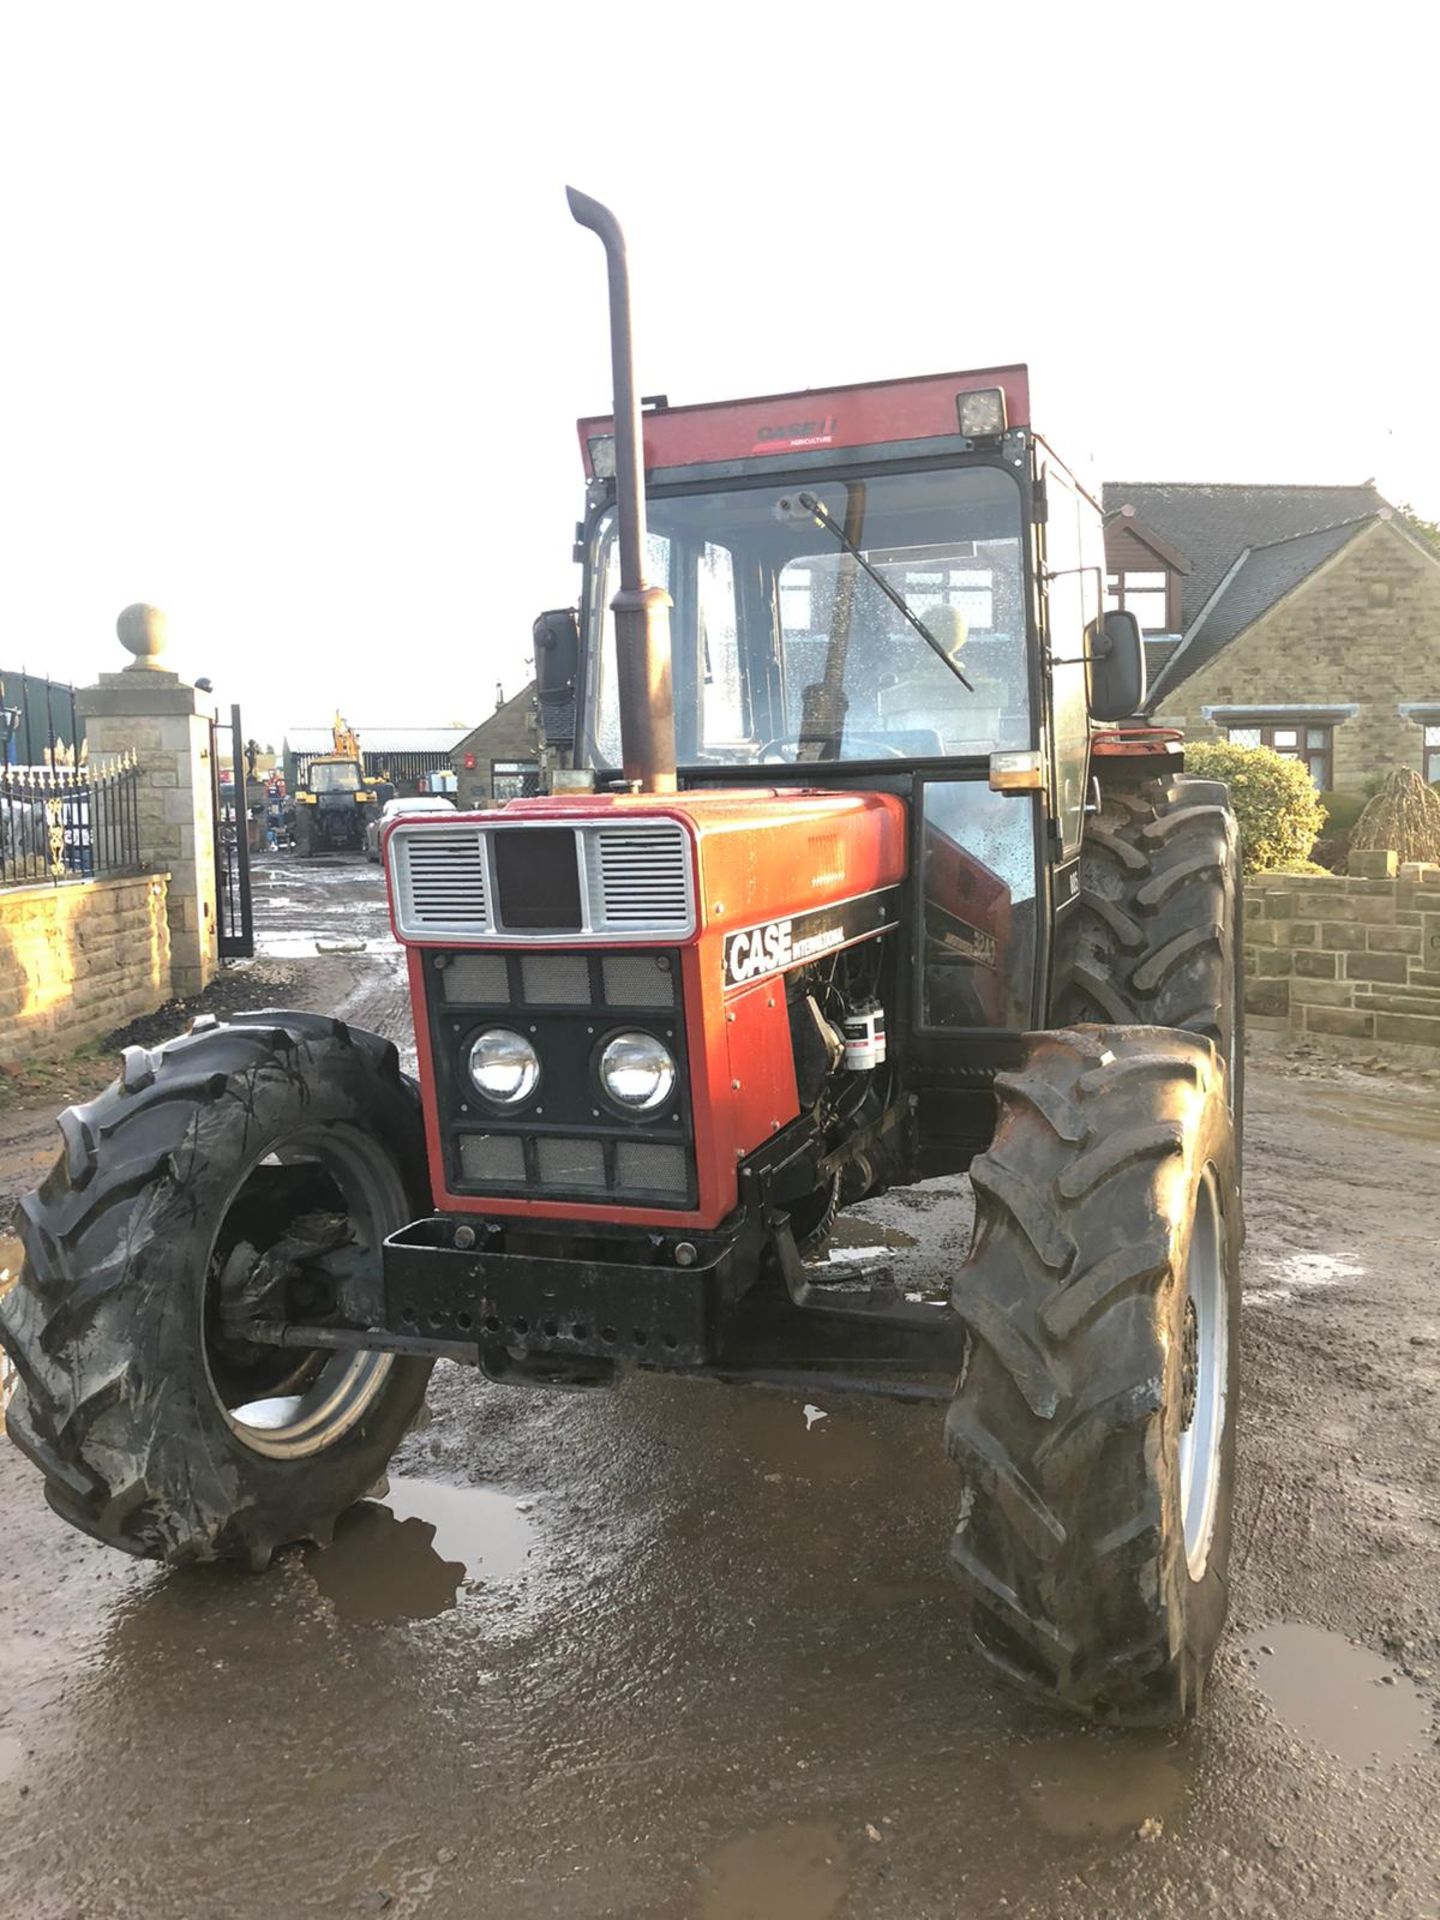 1985/C REG CASE INTERNATIONAL 885 DIESEL RED TRACTOR, RUNS AND WORKS, IN GOOD CONDITION *PLUS VAT* - Image 2 of 9